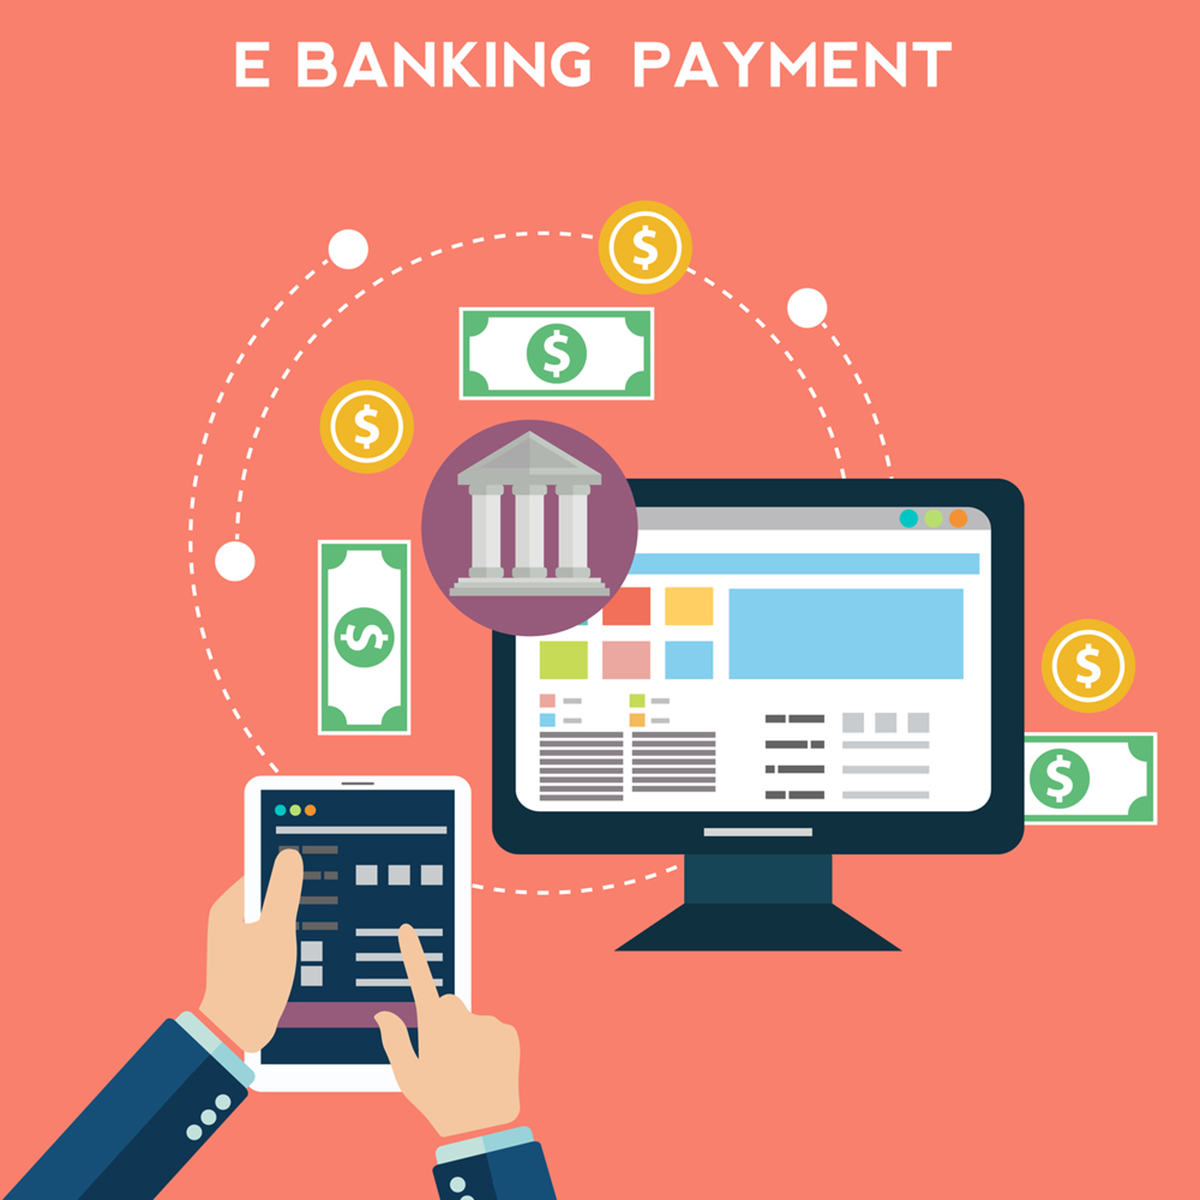 What Is An EFT In Banking